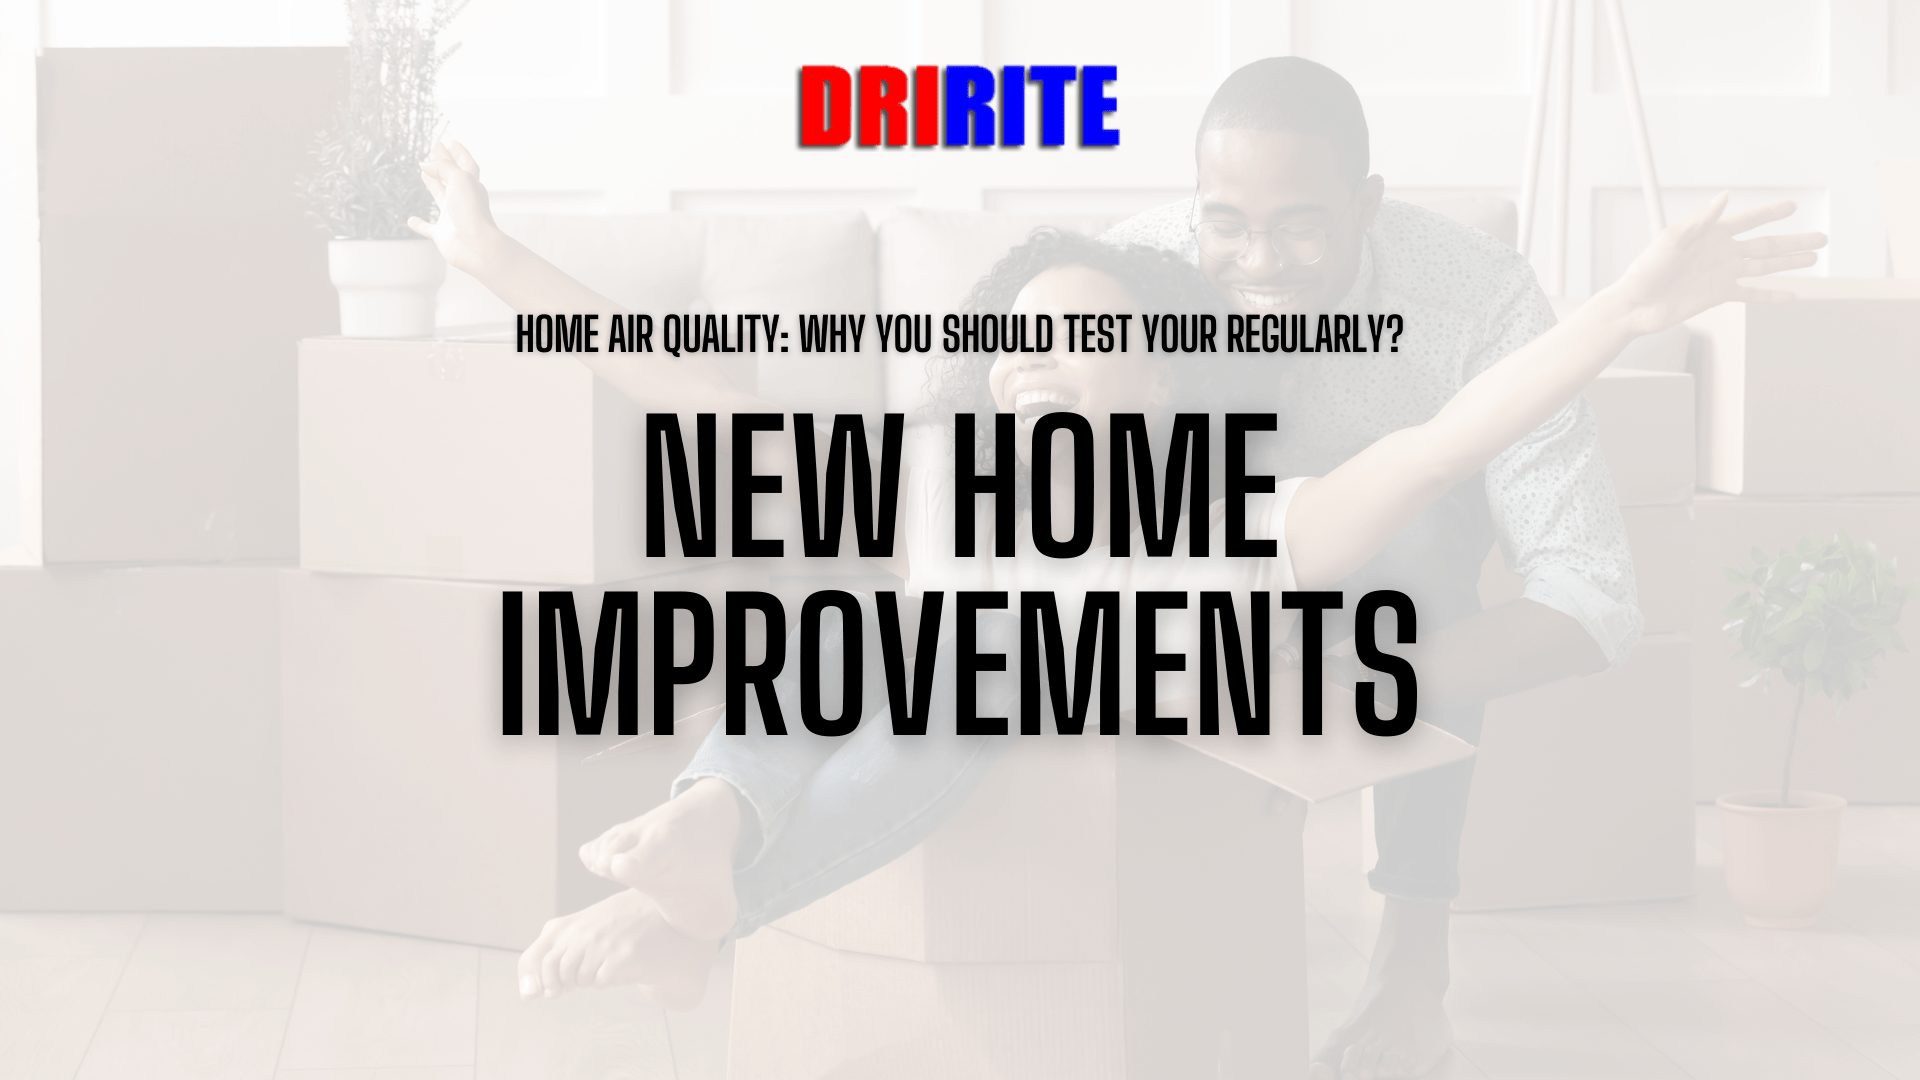 New Home Improvements - Home Air Quality - Why You Should Test Yours Regularly